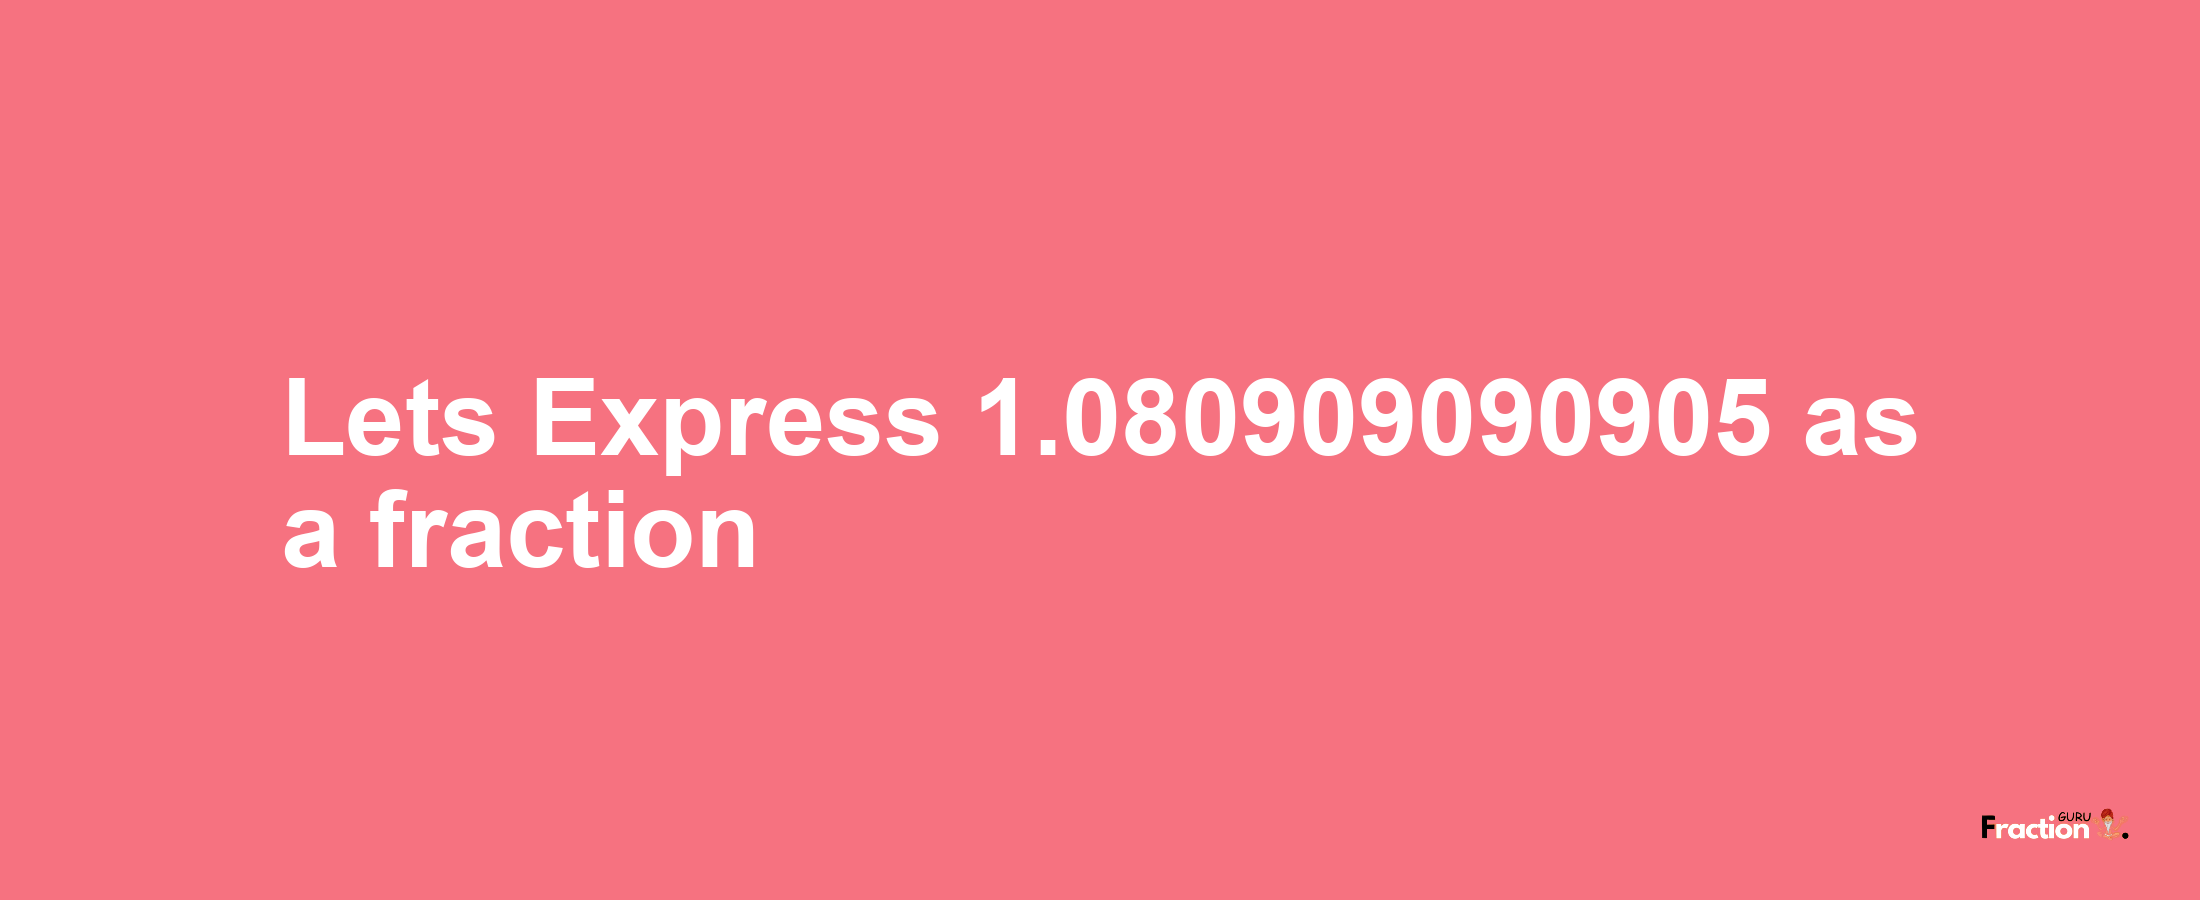 Lets Express 1.080909090905 as afraction